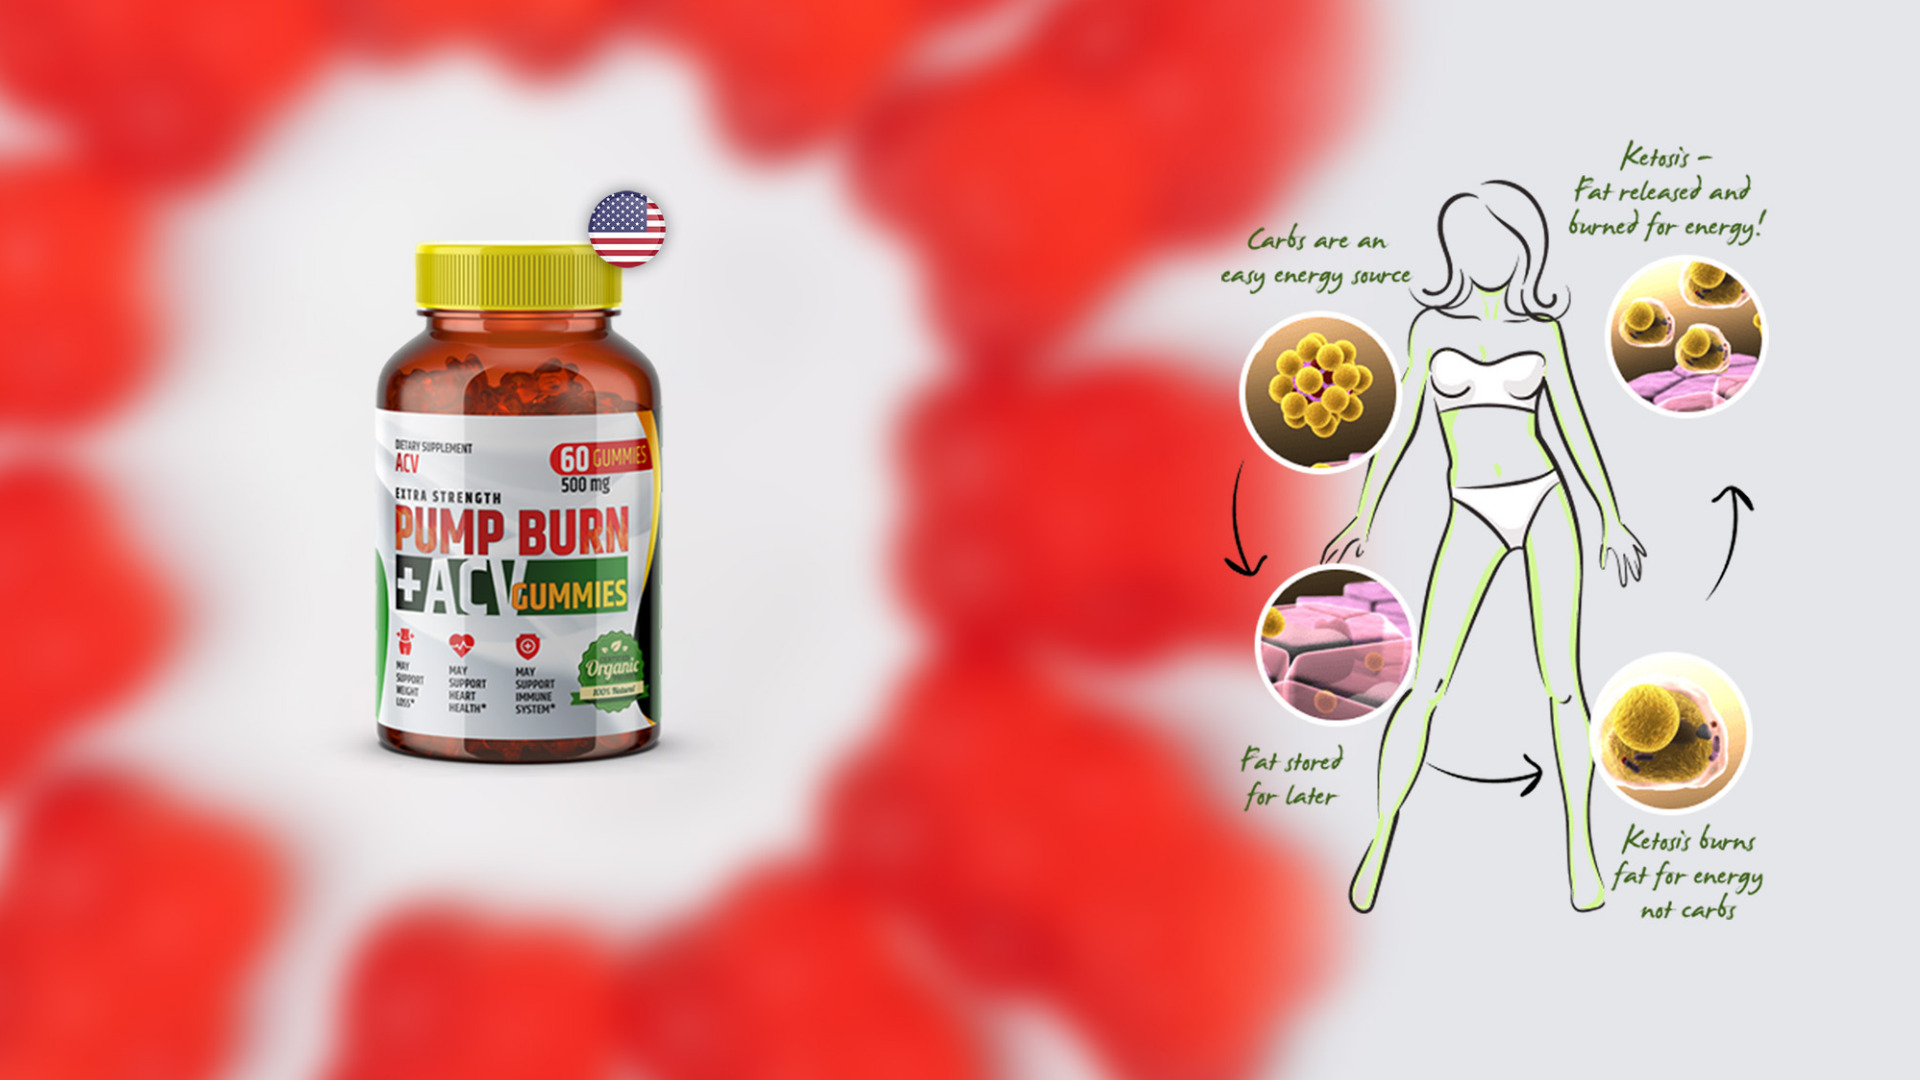 Pump Burn ACV Gummies Reviews - Does It Scam or Work? Truth Here